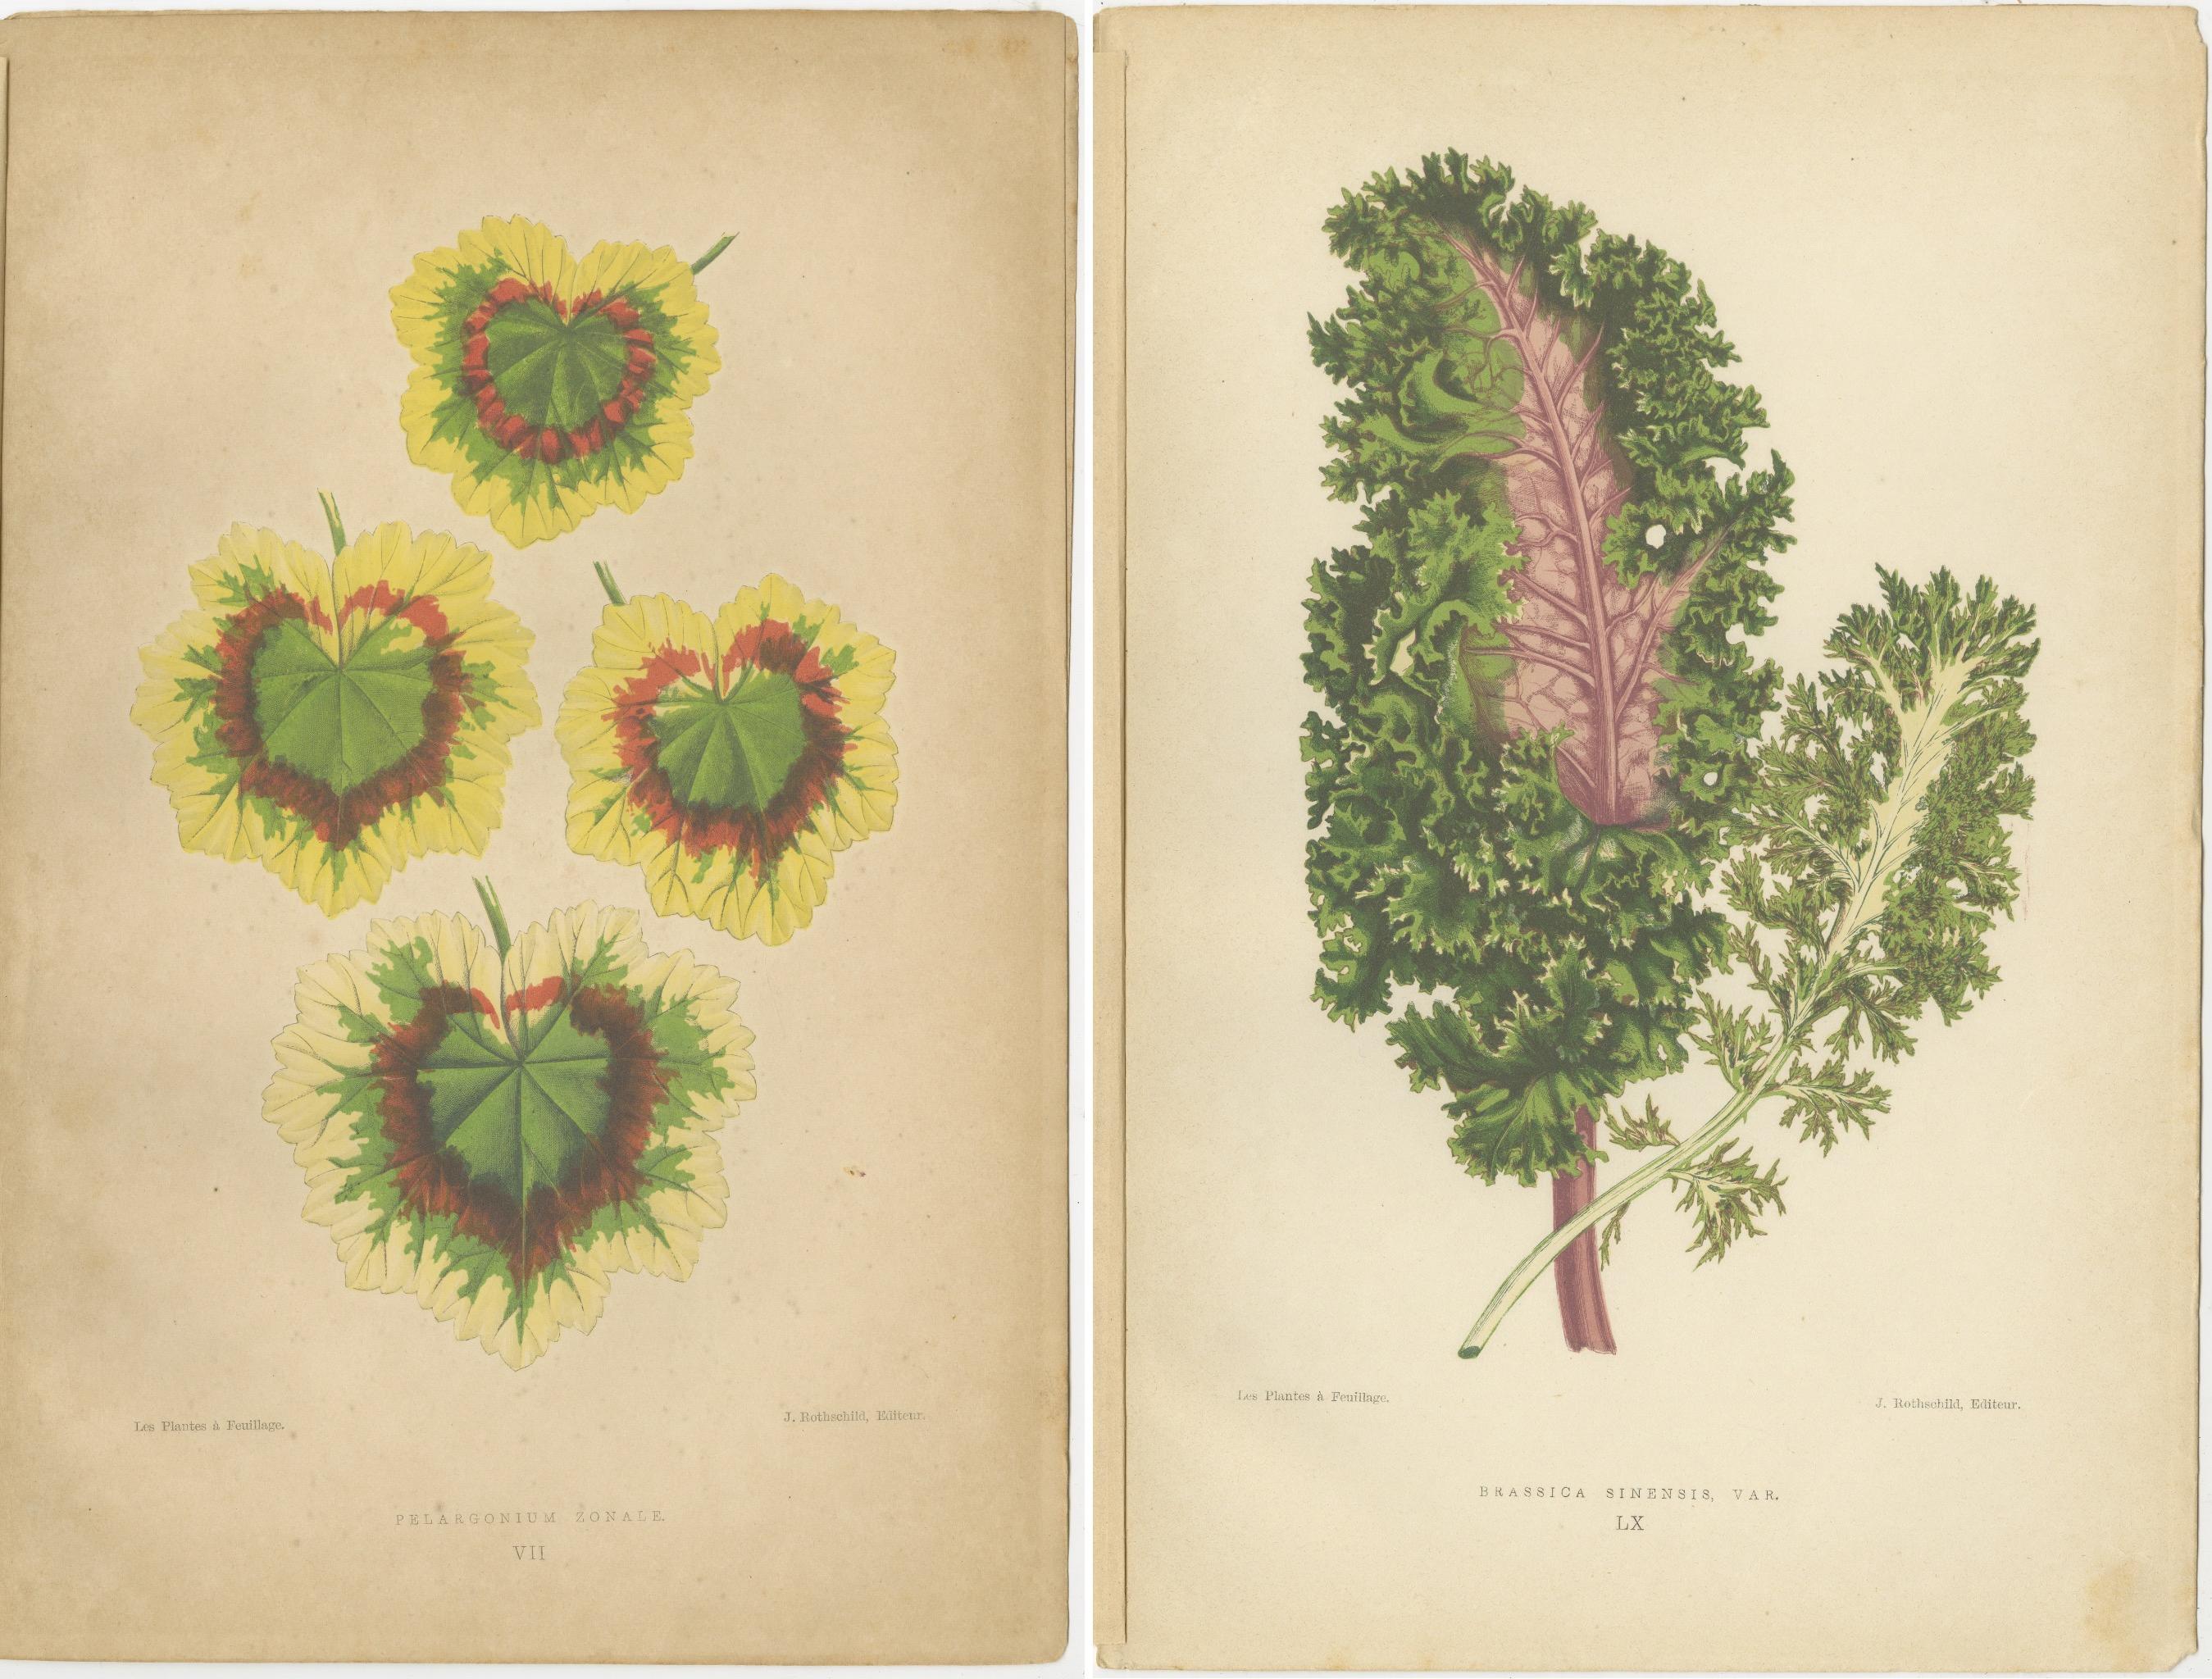 Late 19th Century Contrasts in Nature: Pelargonium and Brassica - Botanical Art from 1880 For Sale